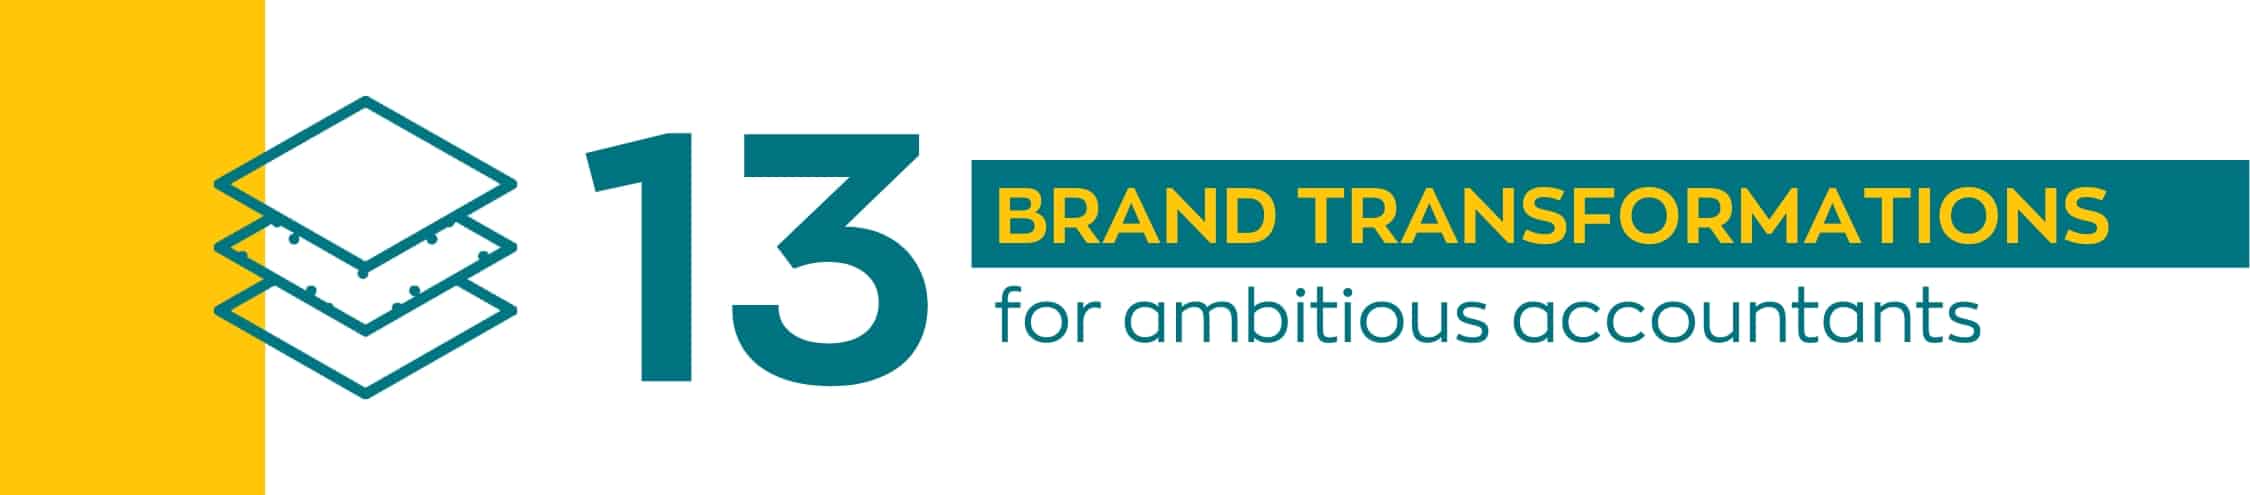 13 brand transformations for ambitious accountants